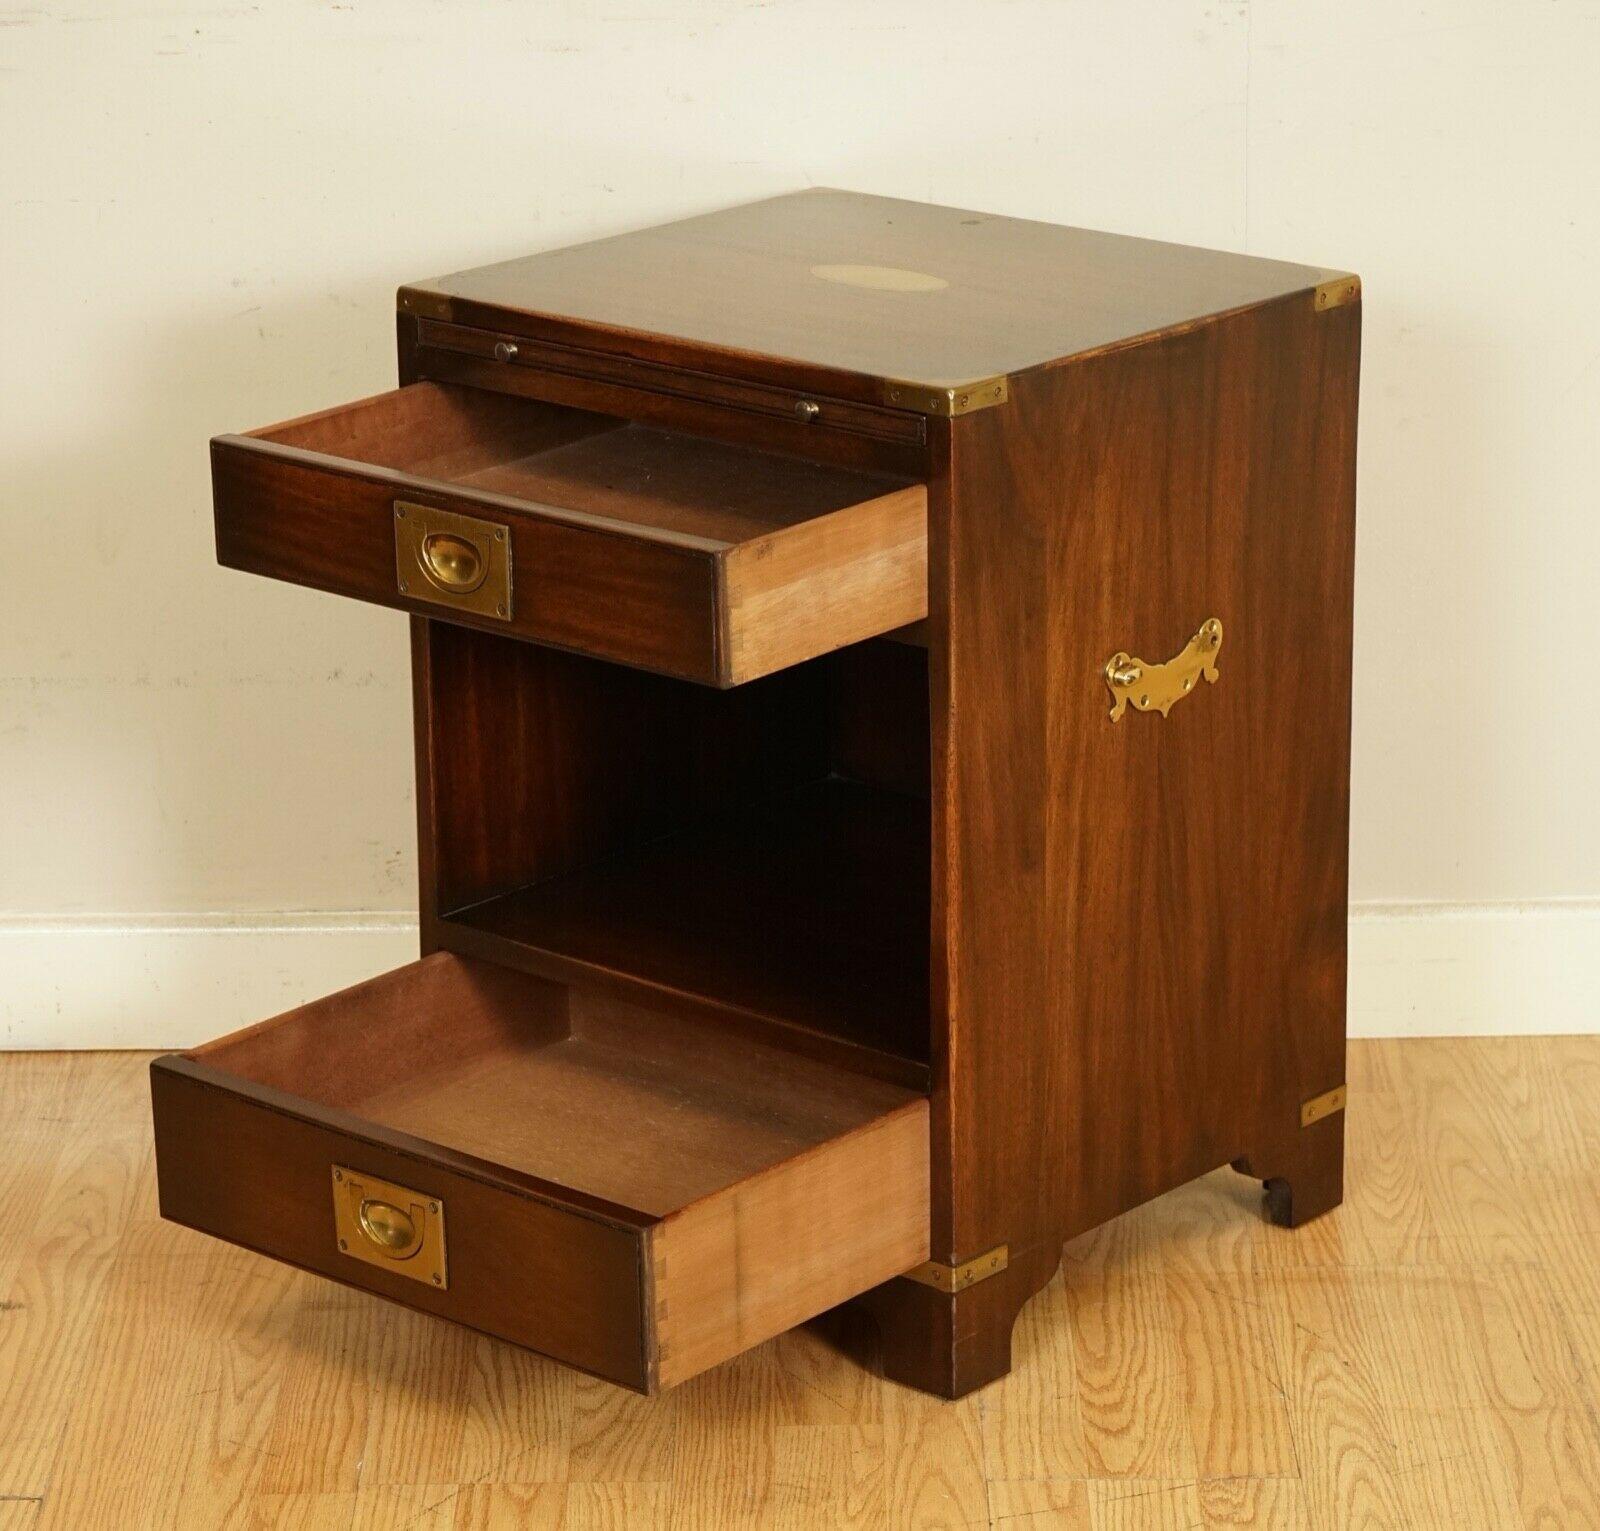 Hand-Crafted Vintage Military Campaign Hardwood Bedside/End Table with 2 Drawers